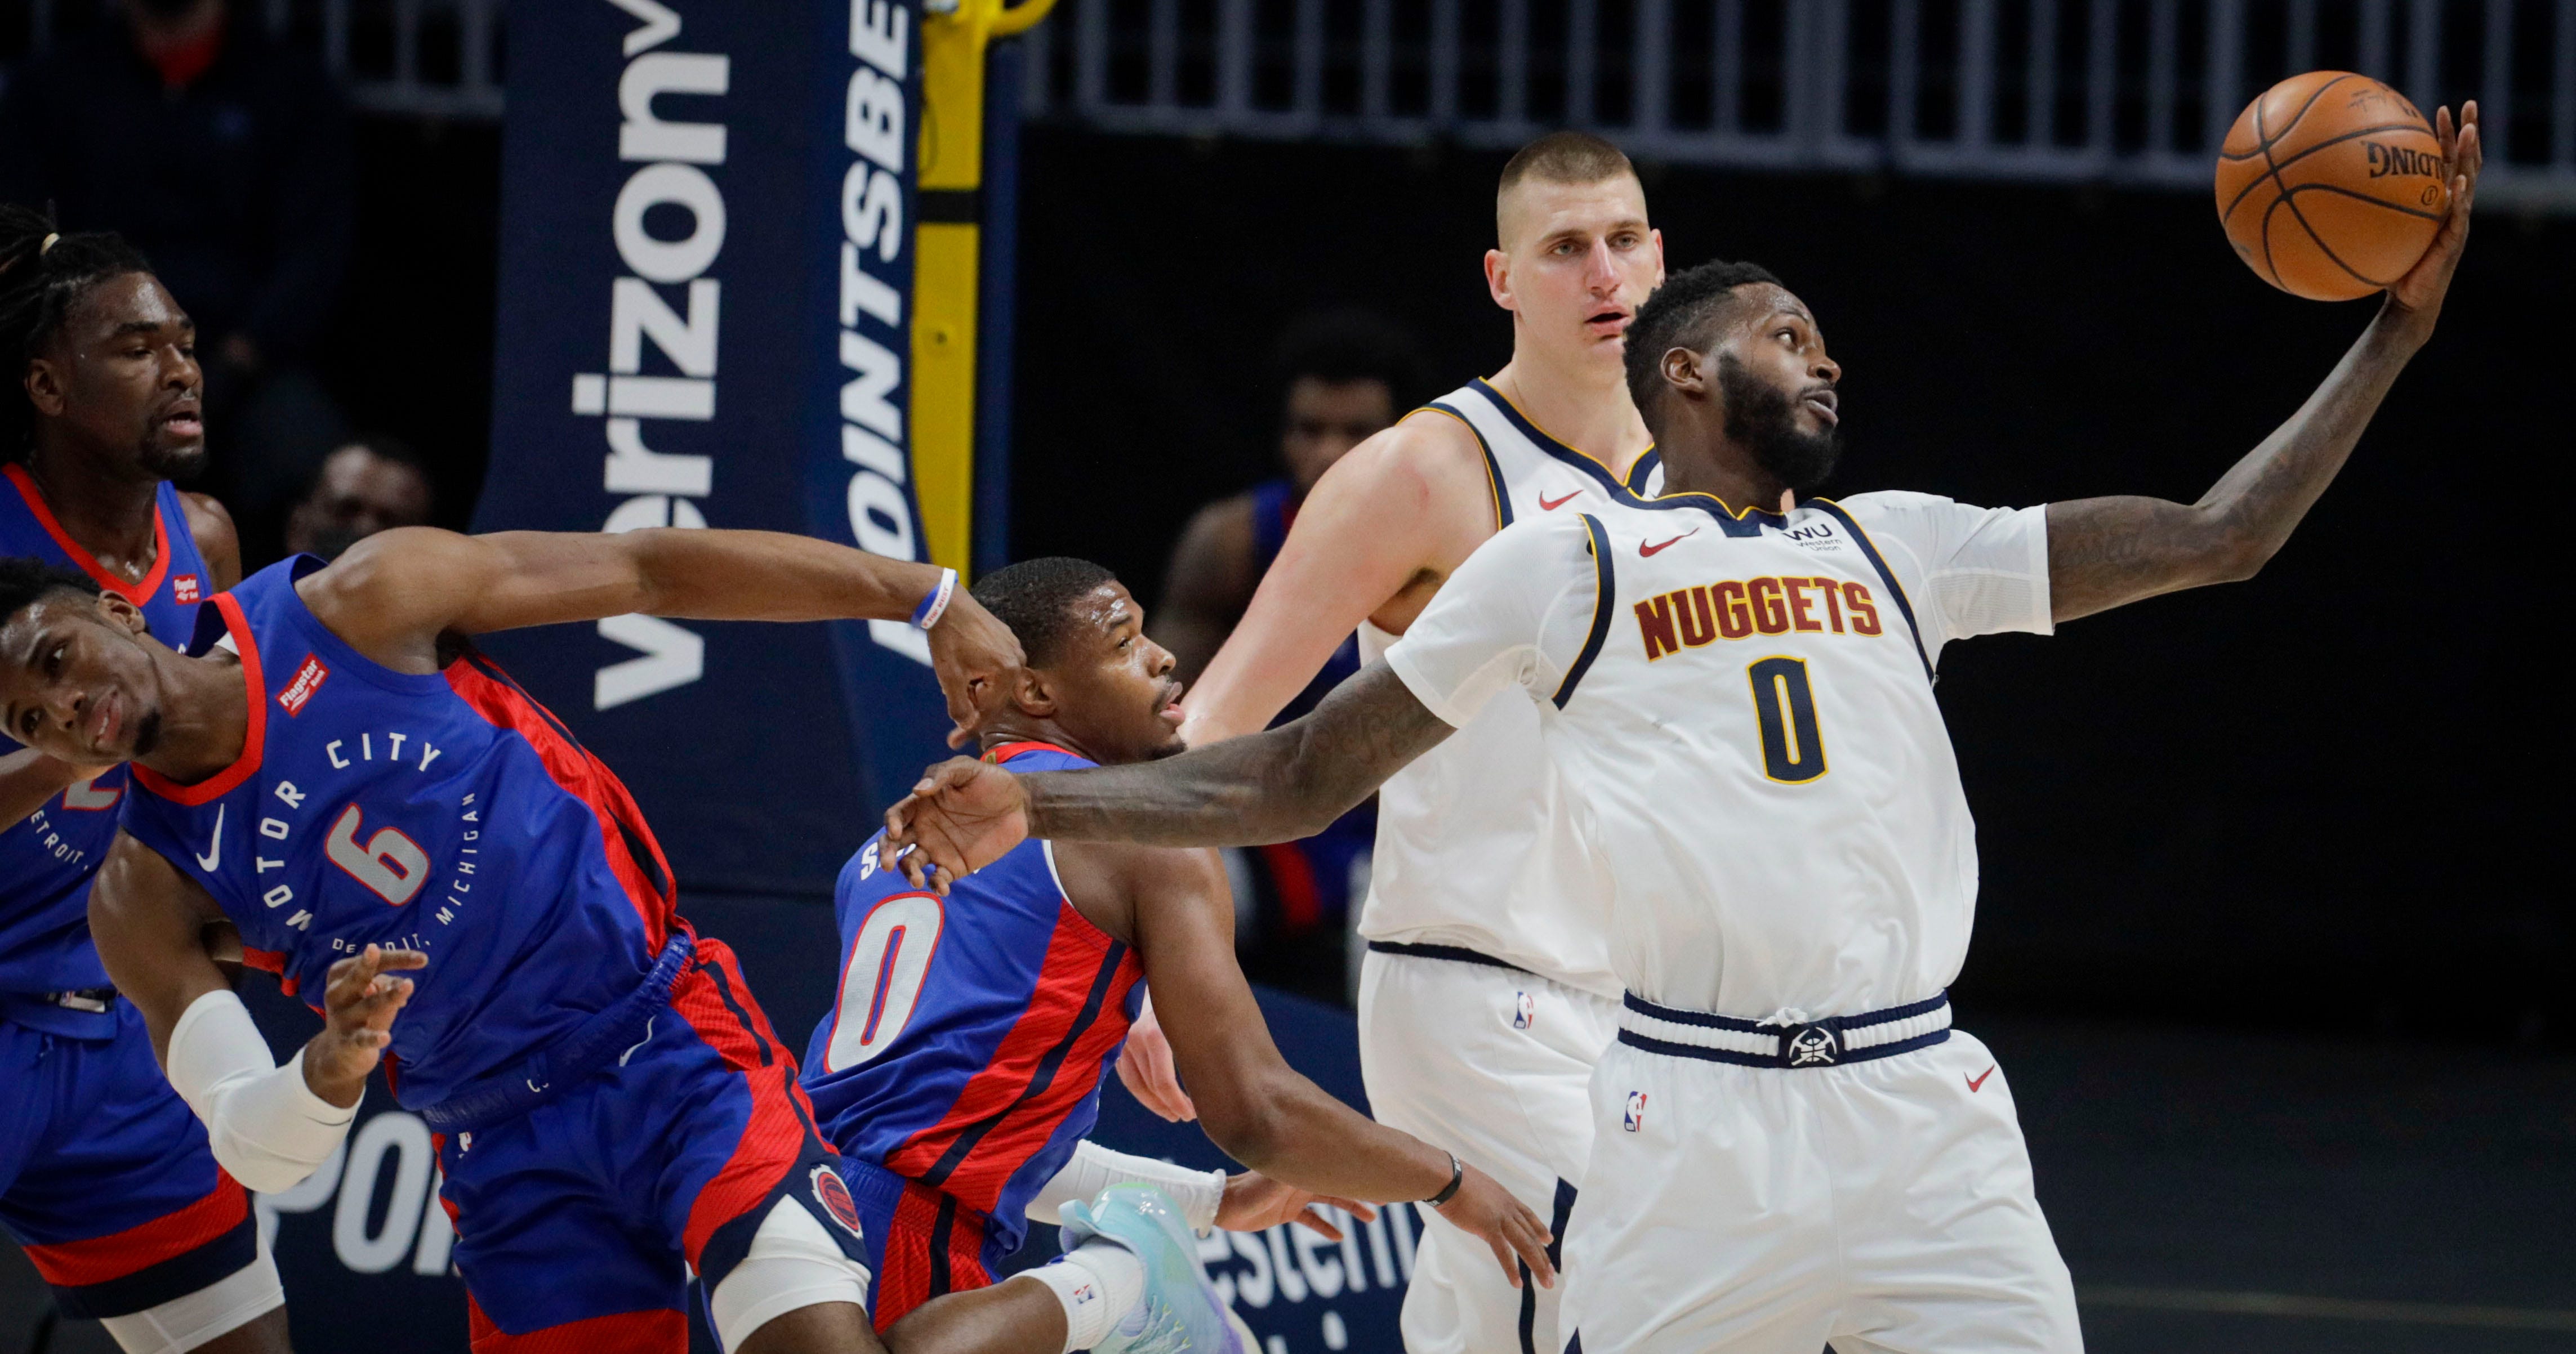 Denver Nuggets forward JaMychal Green, right, pulls in a loose ball against Detroit Pistons guards Dennis Smith Jr. (0) and Hamidou Diallo (6) as Nuggets center Nikola Jokic (15) watches in the third quarter of an NBA basketball game in Denver, Tuesday, April 6, 2021.